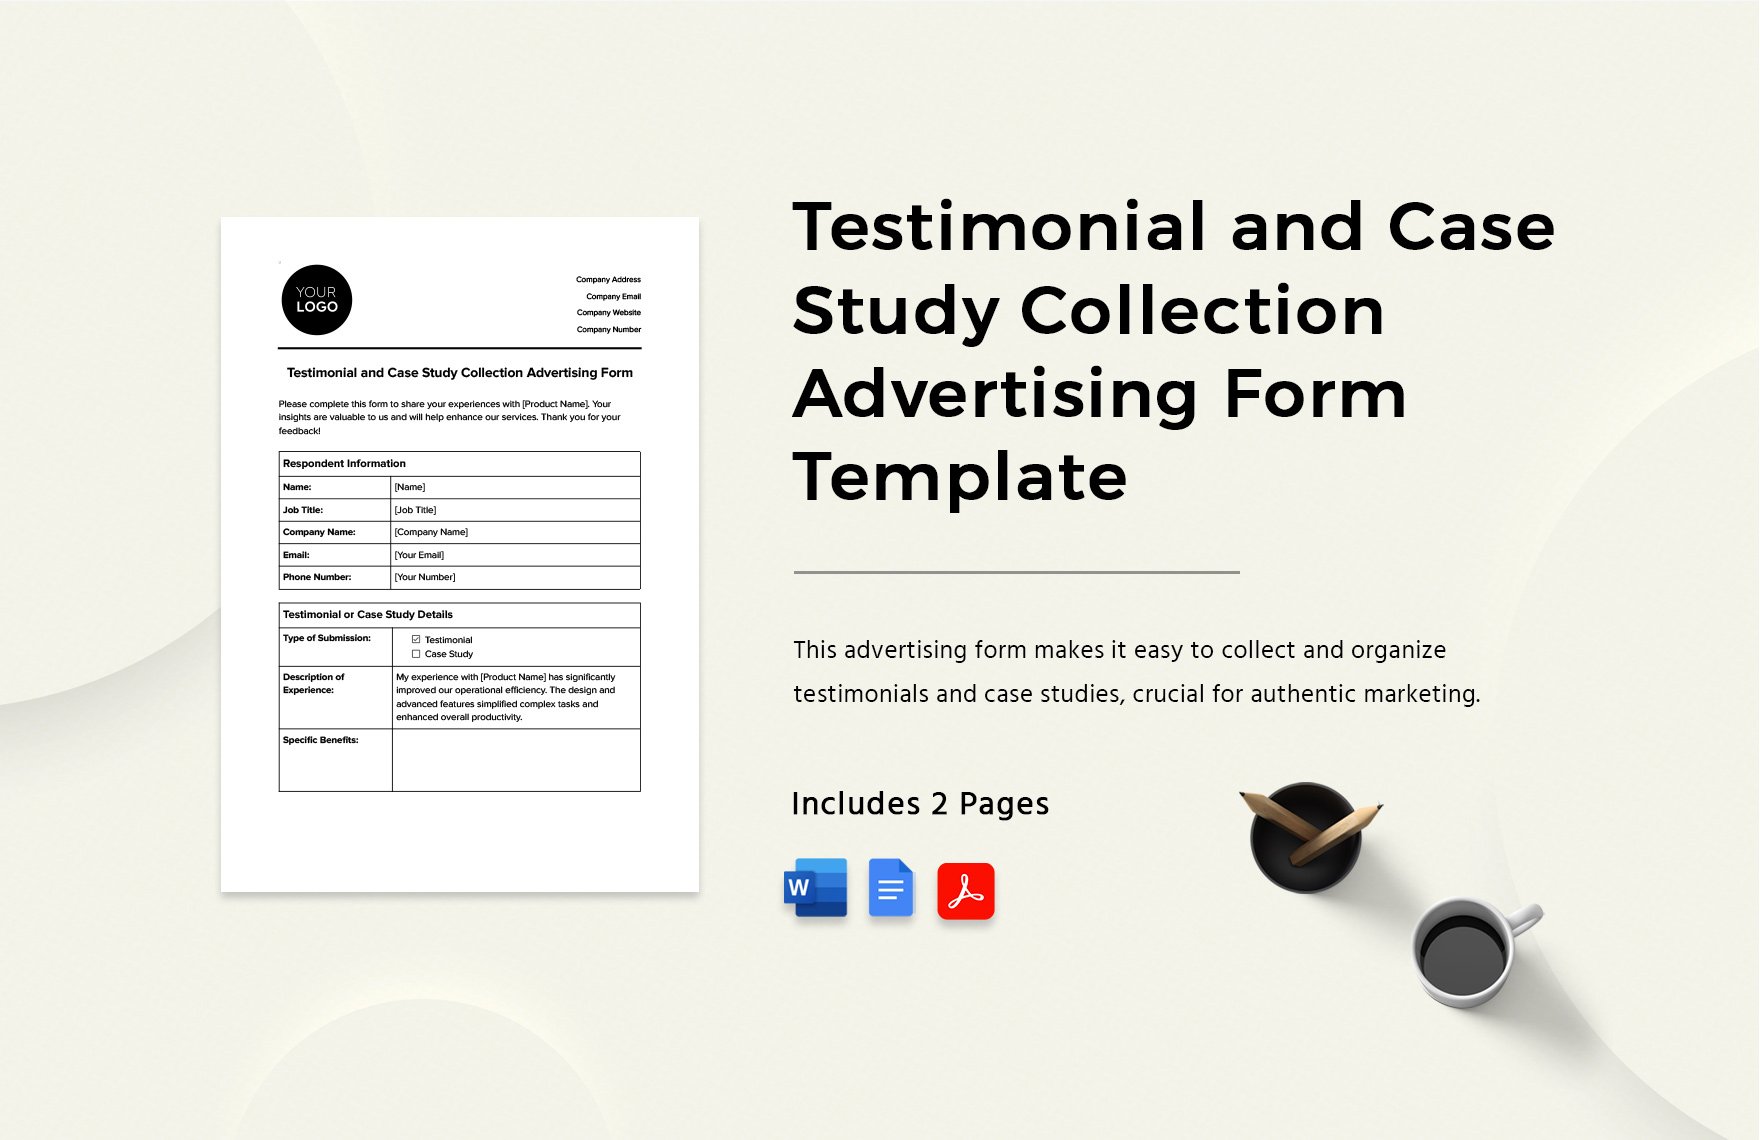 Testimonial and Case Study Collection Advertising Form Template in Word, Google Docs, PDF